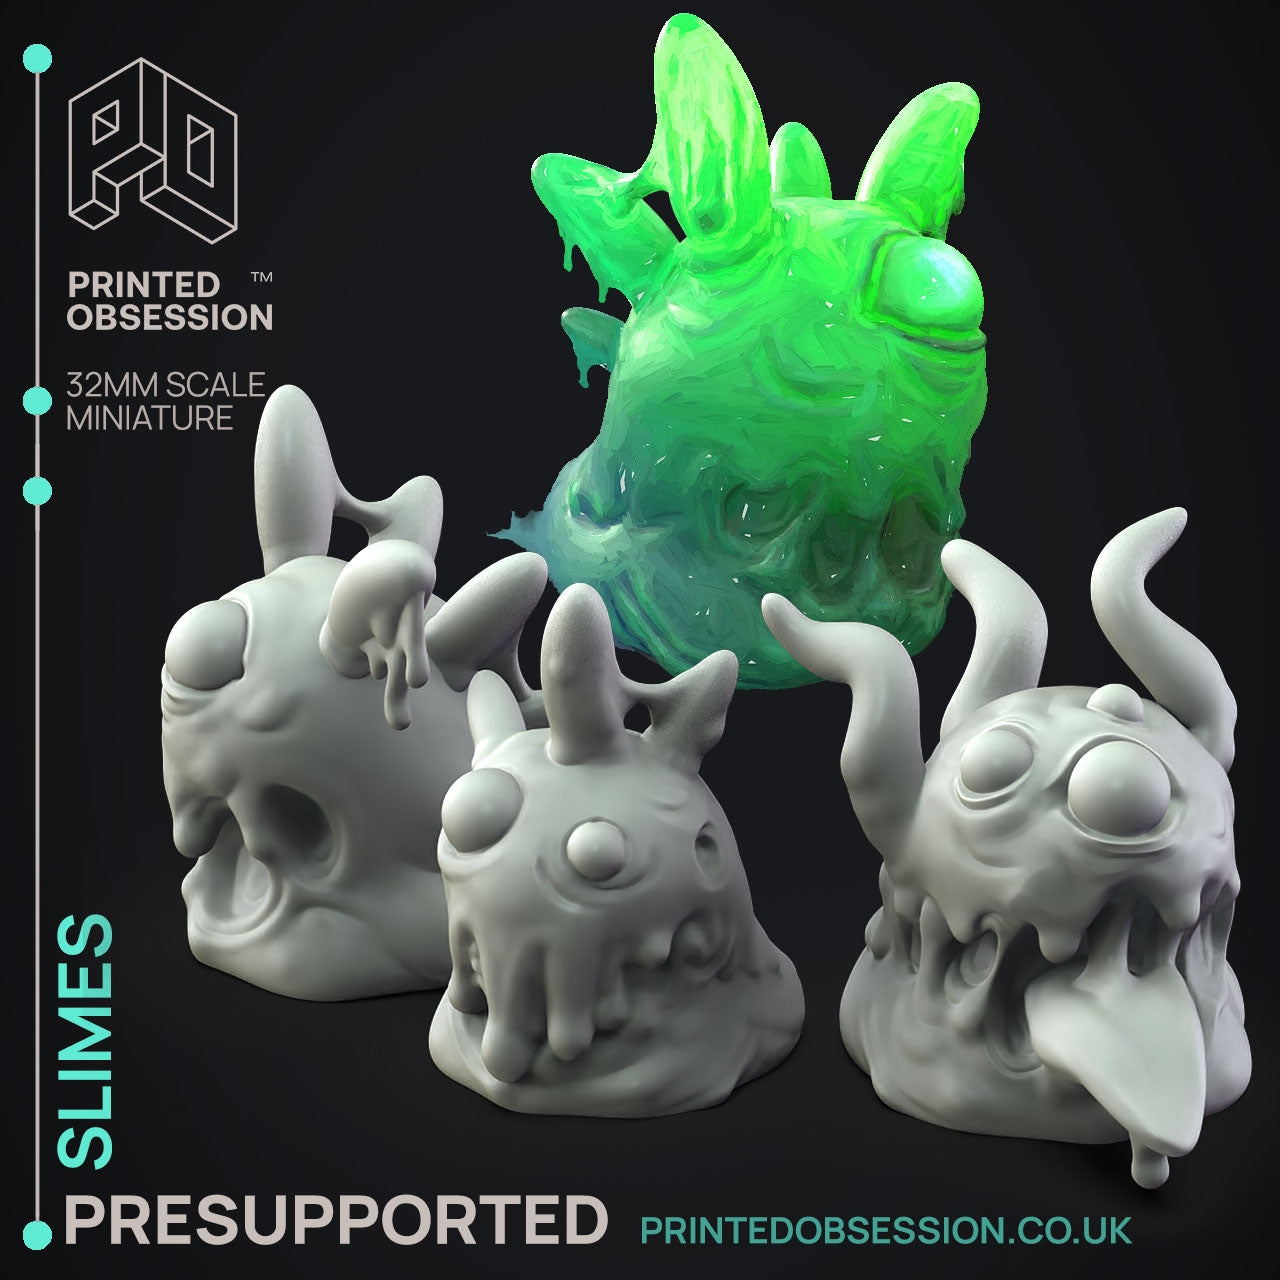 Slimes - The Printed Obsession - Table-top mini, 3D Printed Collectable for painting and playing!